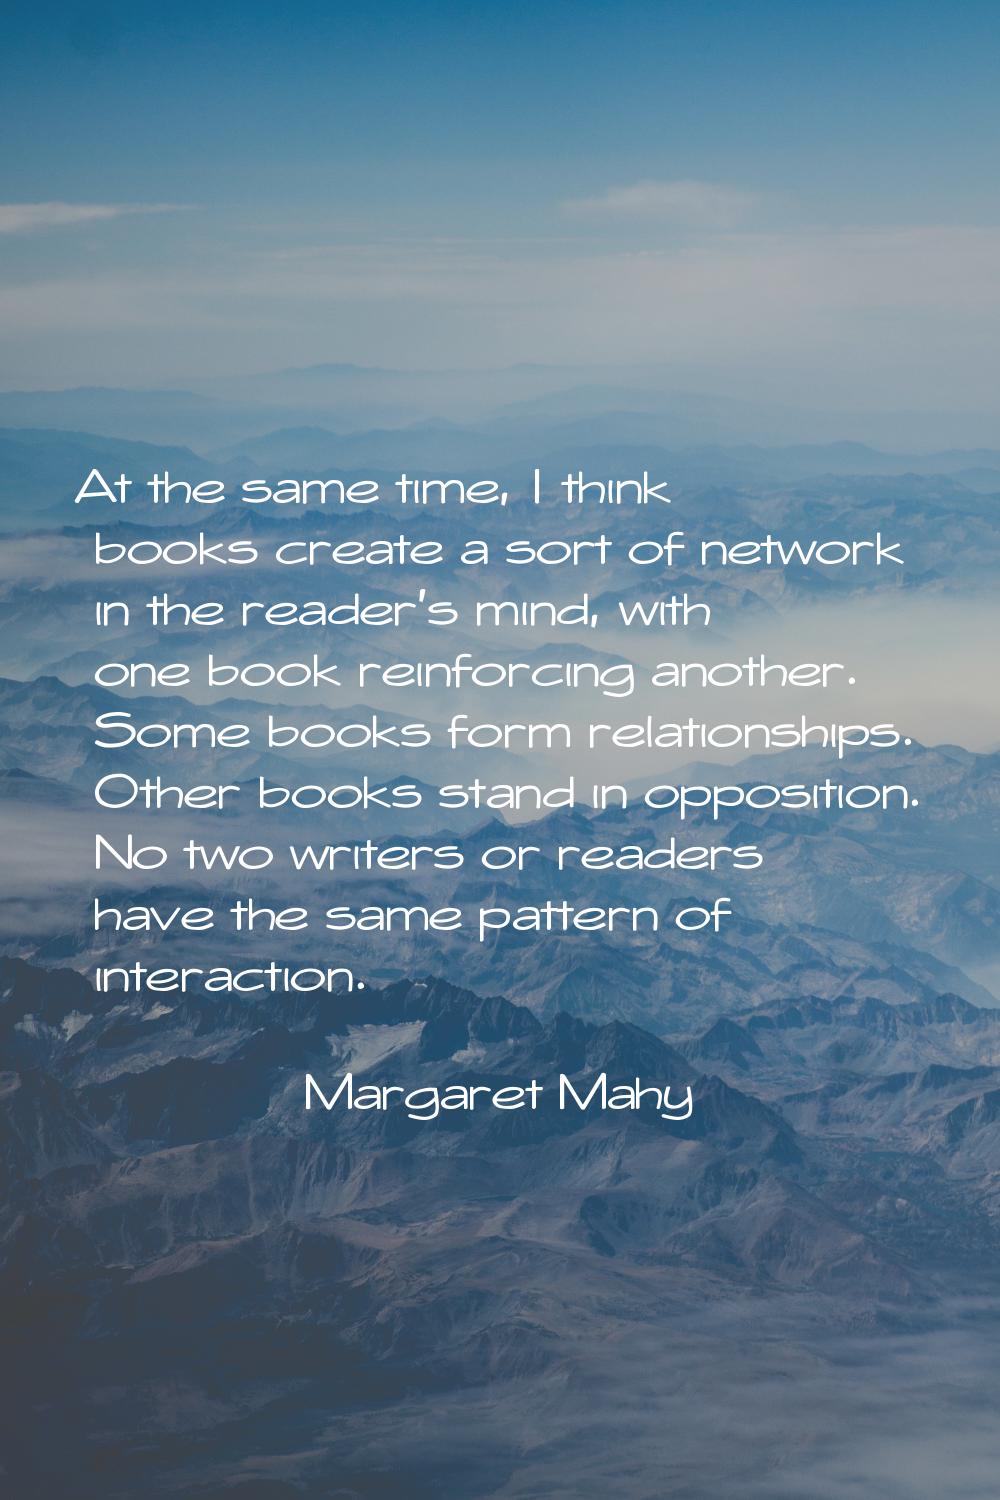 At the same time, I think books create a sort of network in the reader's mind, with one book reinfo